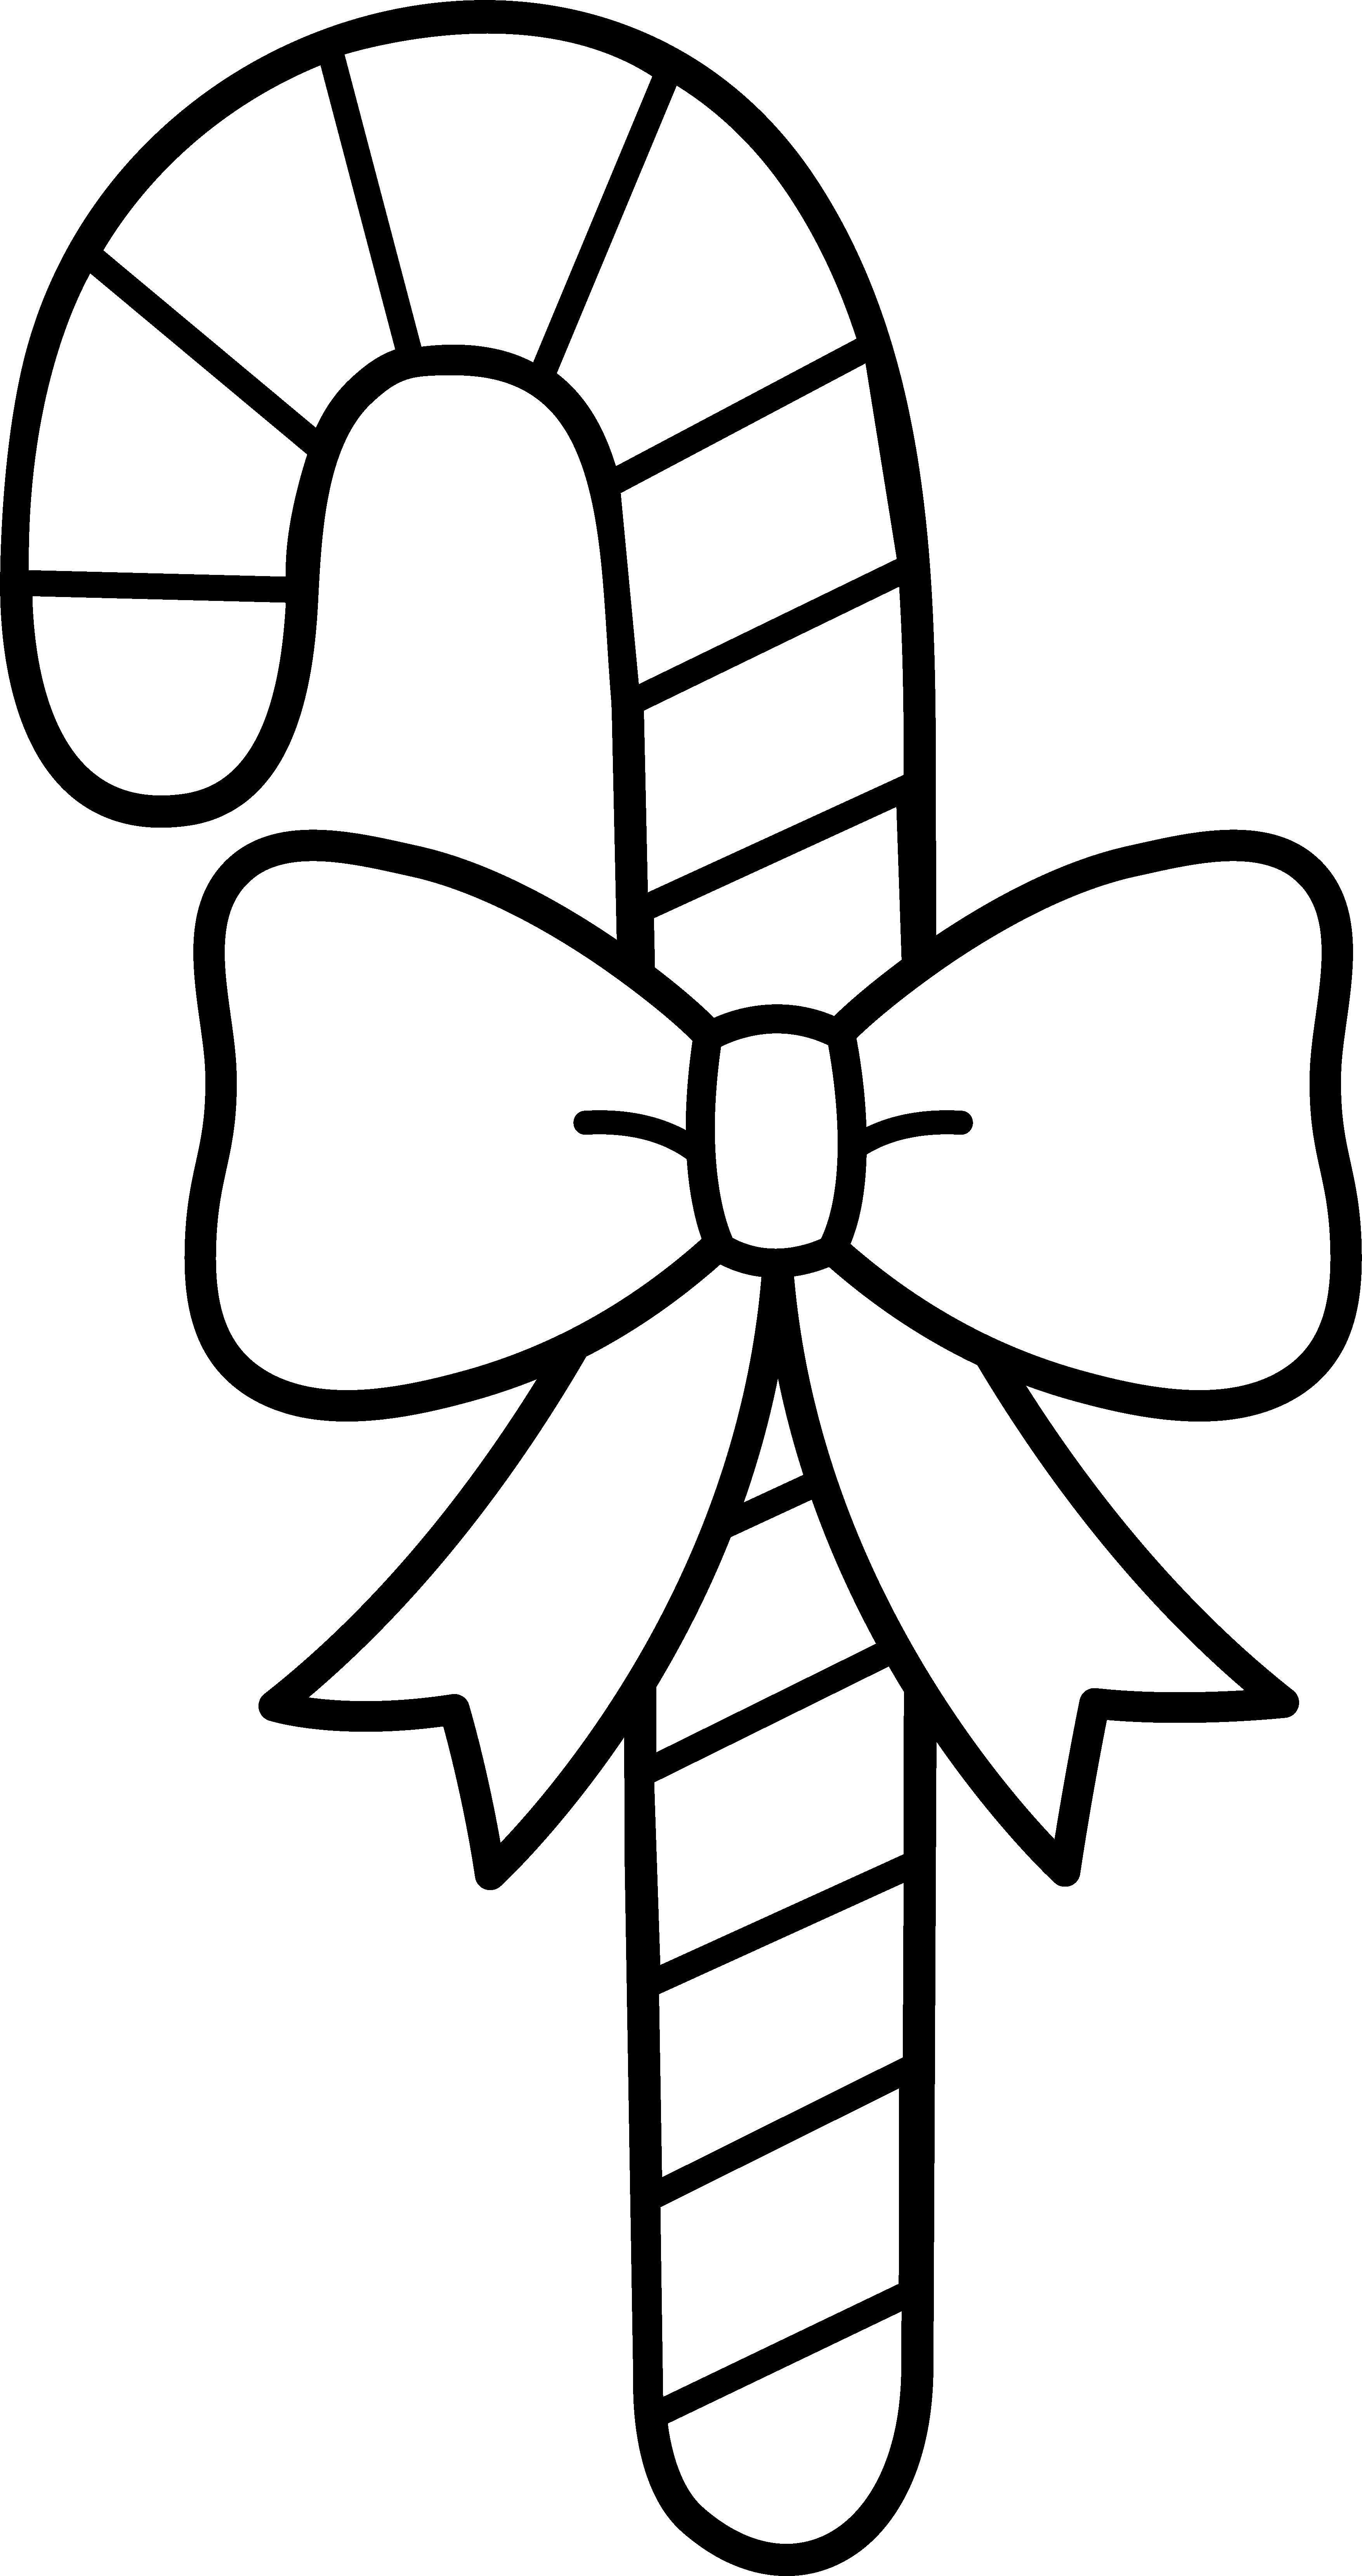 ... Candy cane black and white clipart ...